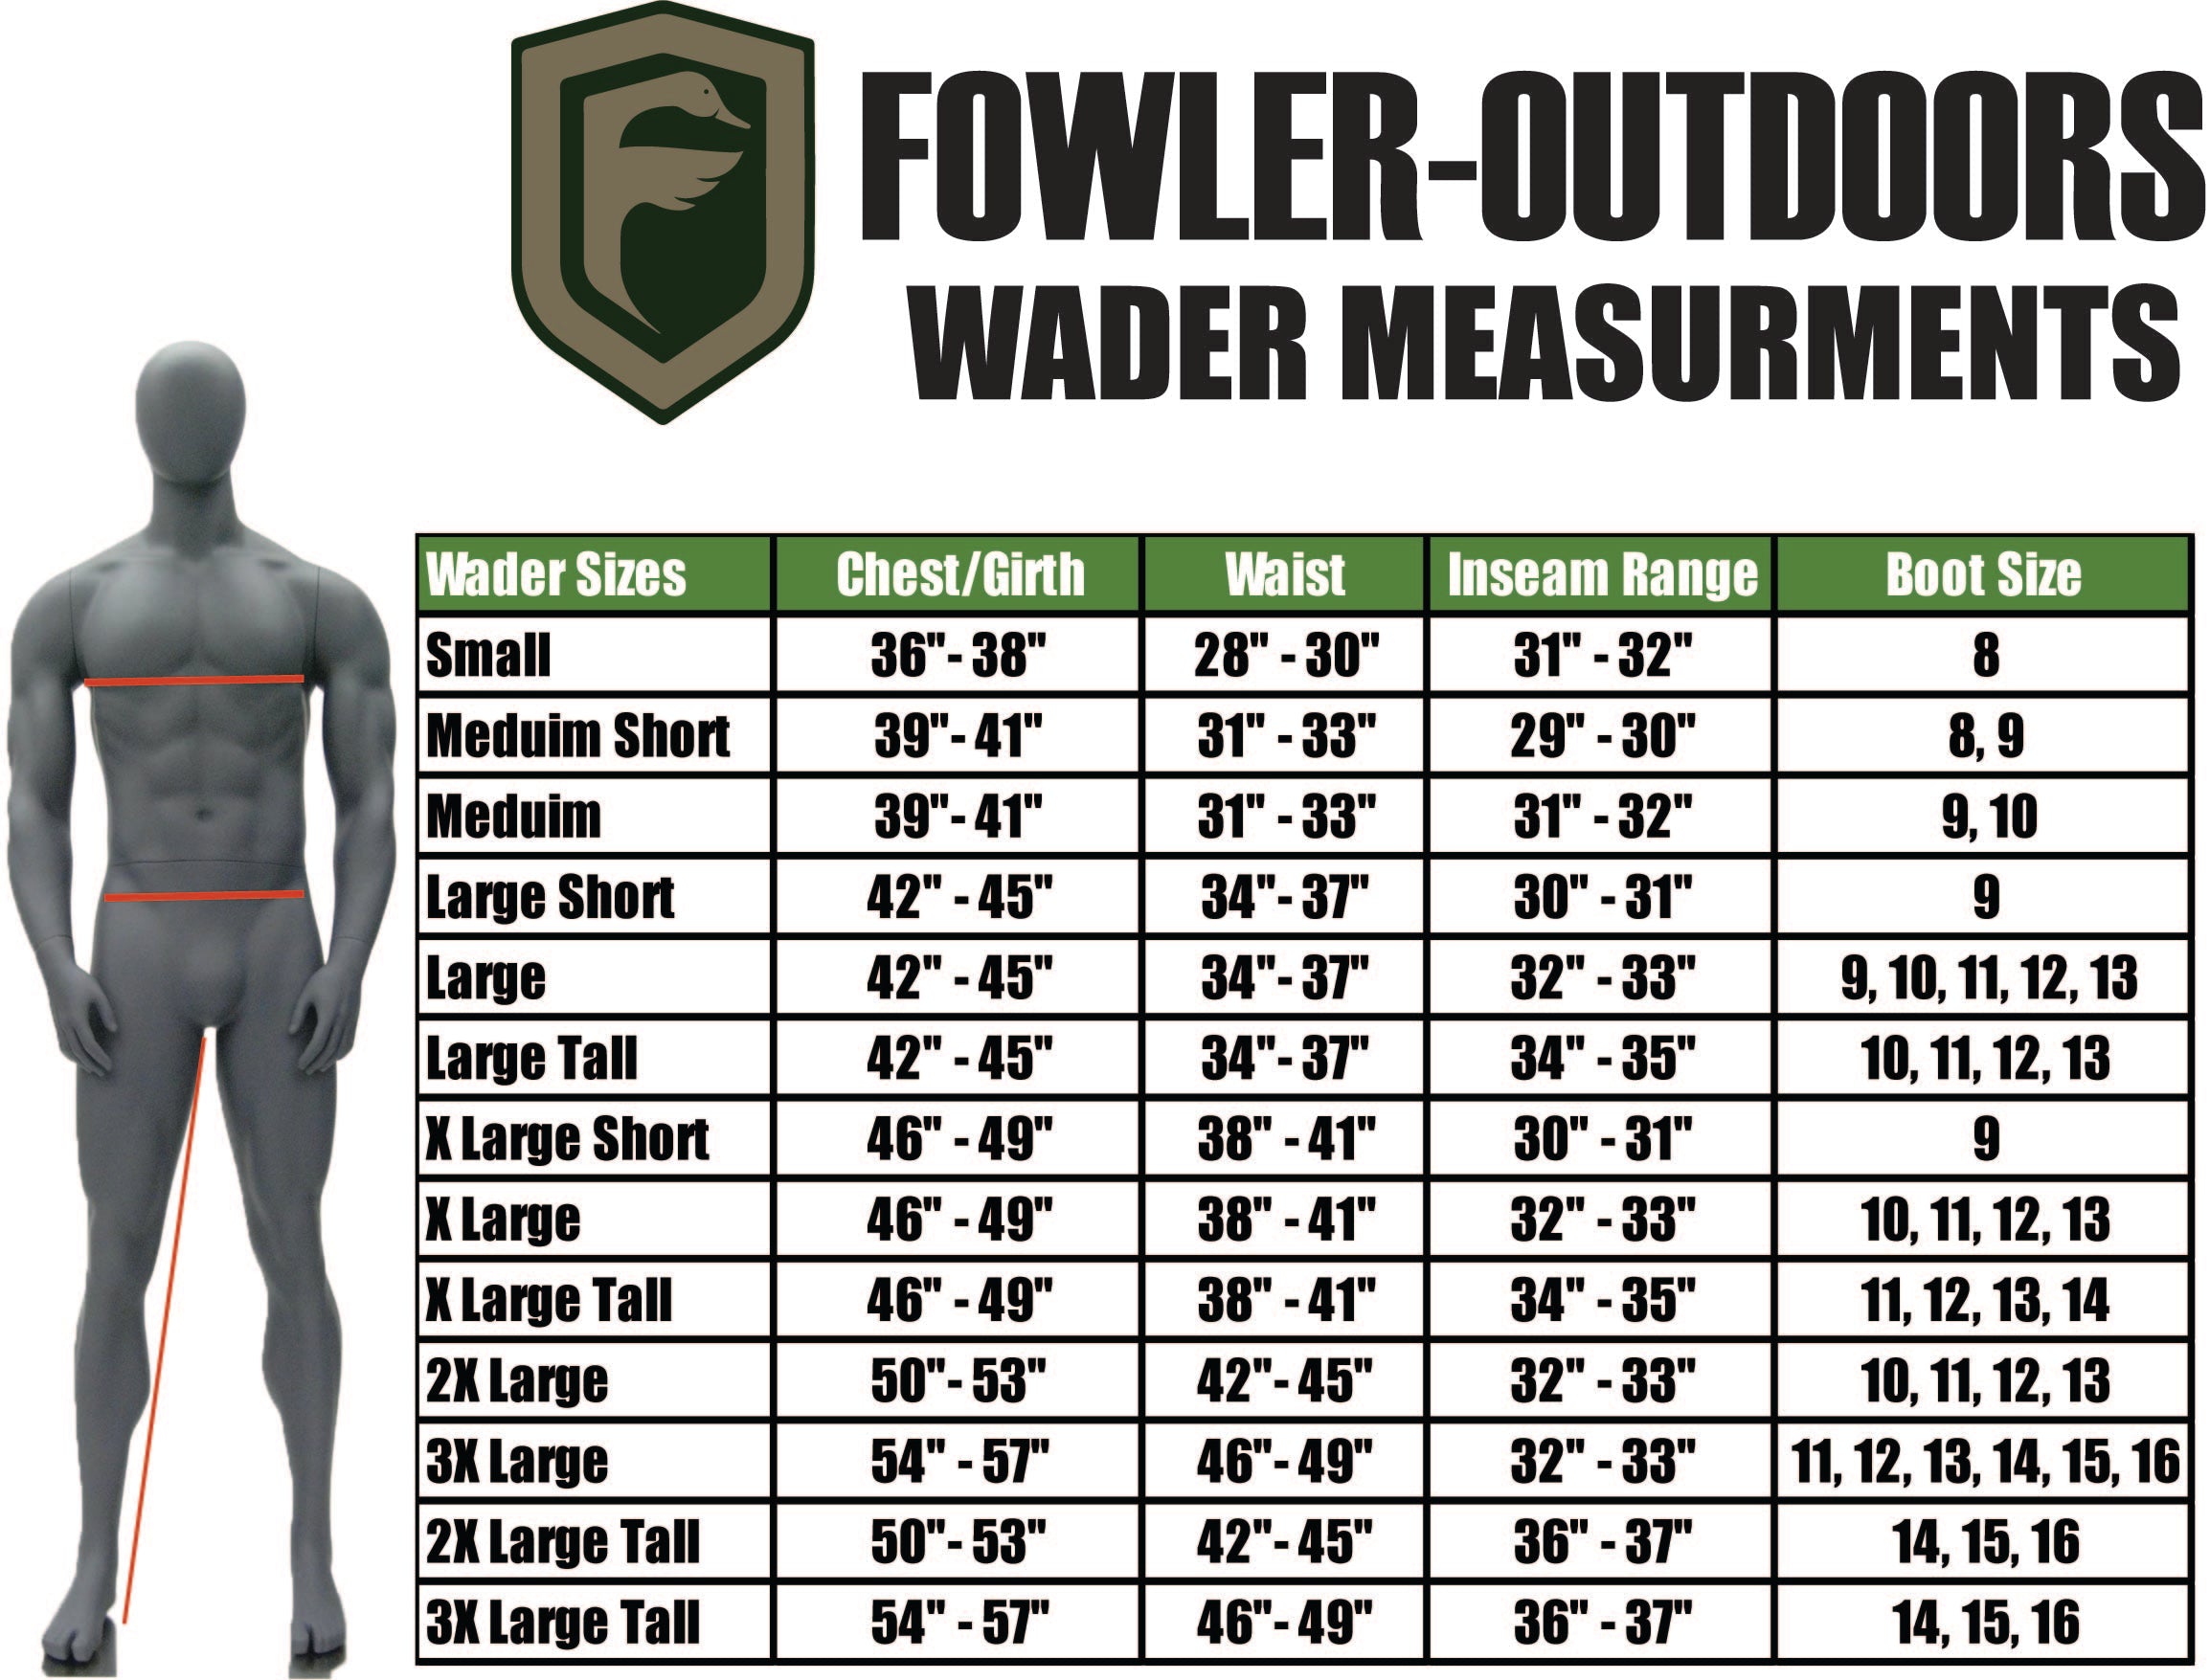 White River Waders Size Chart - Fill Online, Printable, Fillable, Blank